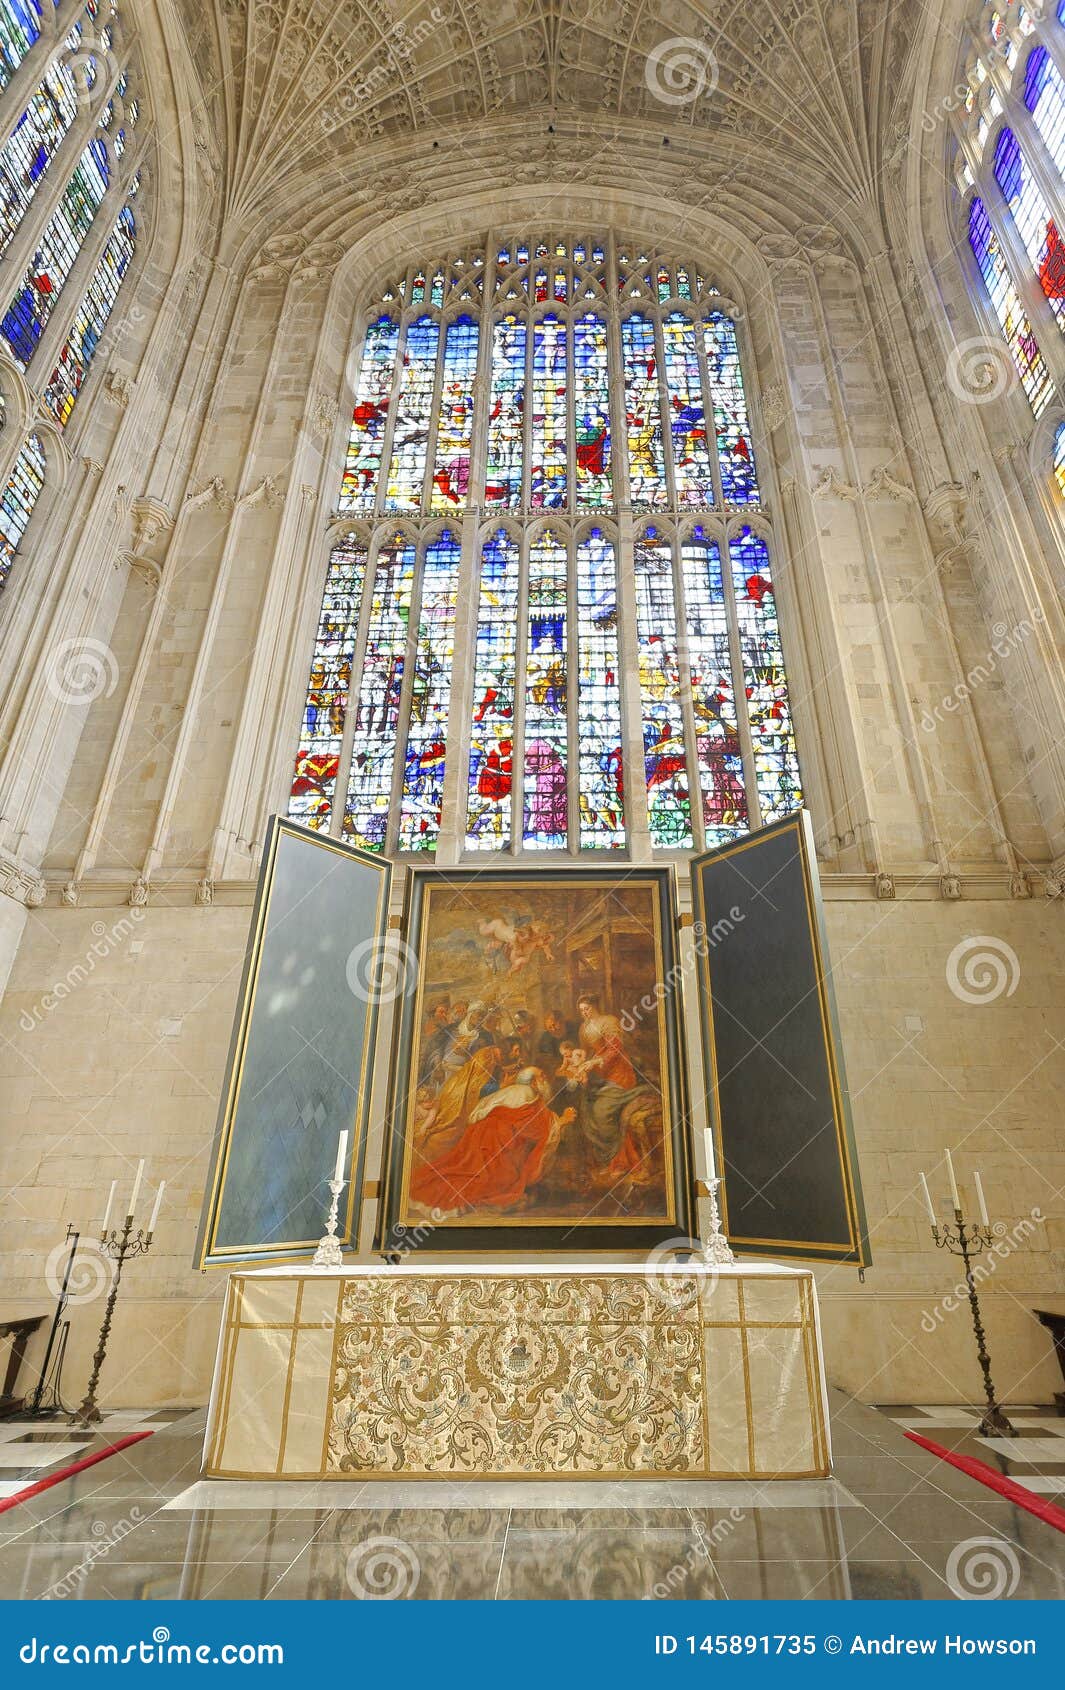 Gothic Ceiling Kings College Chapel Masterpiece Editorial